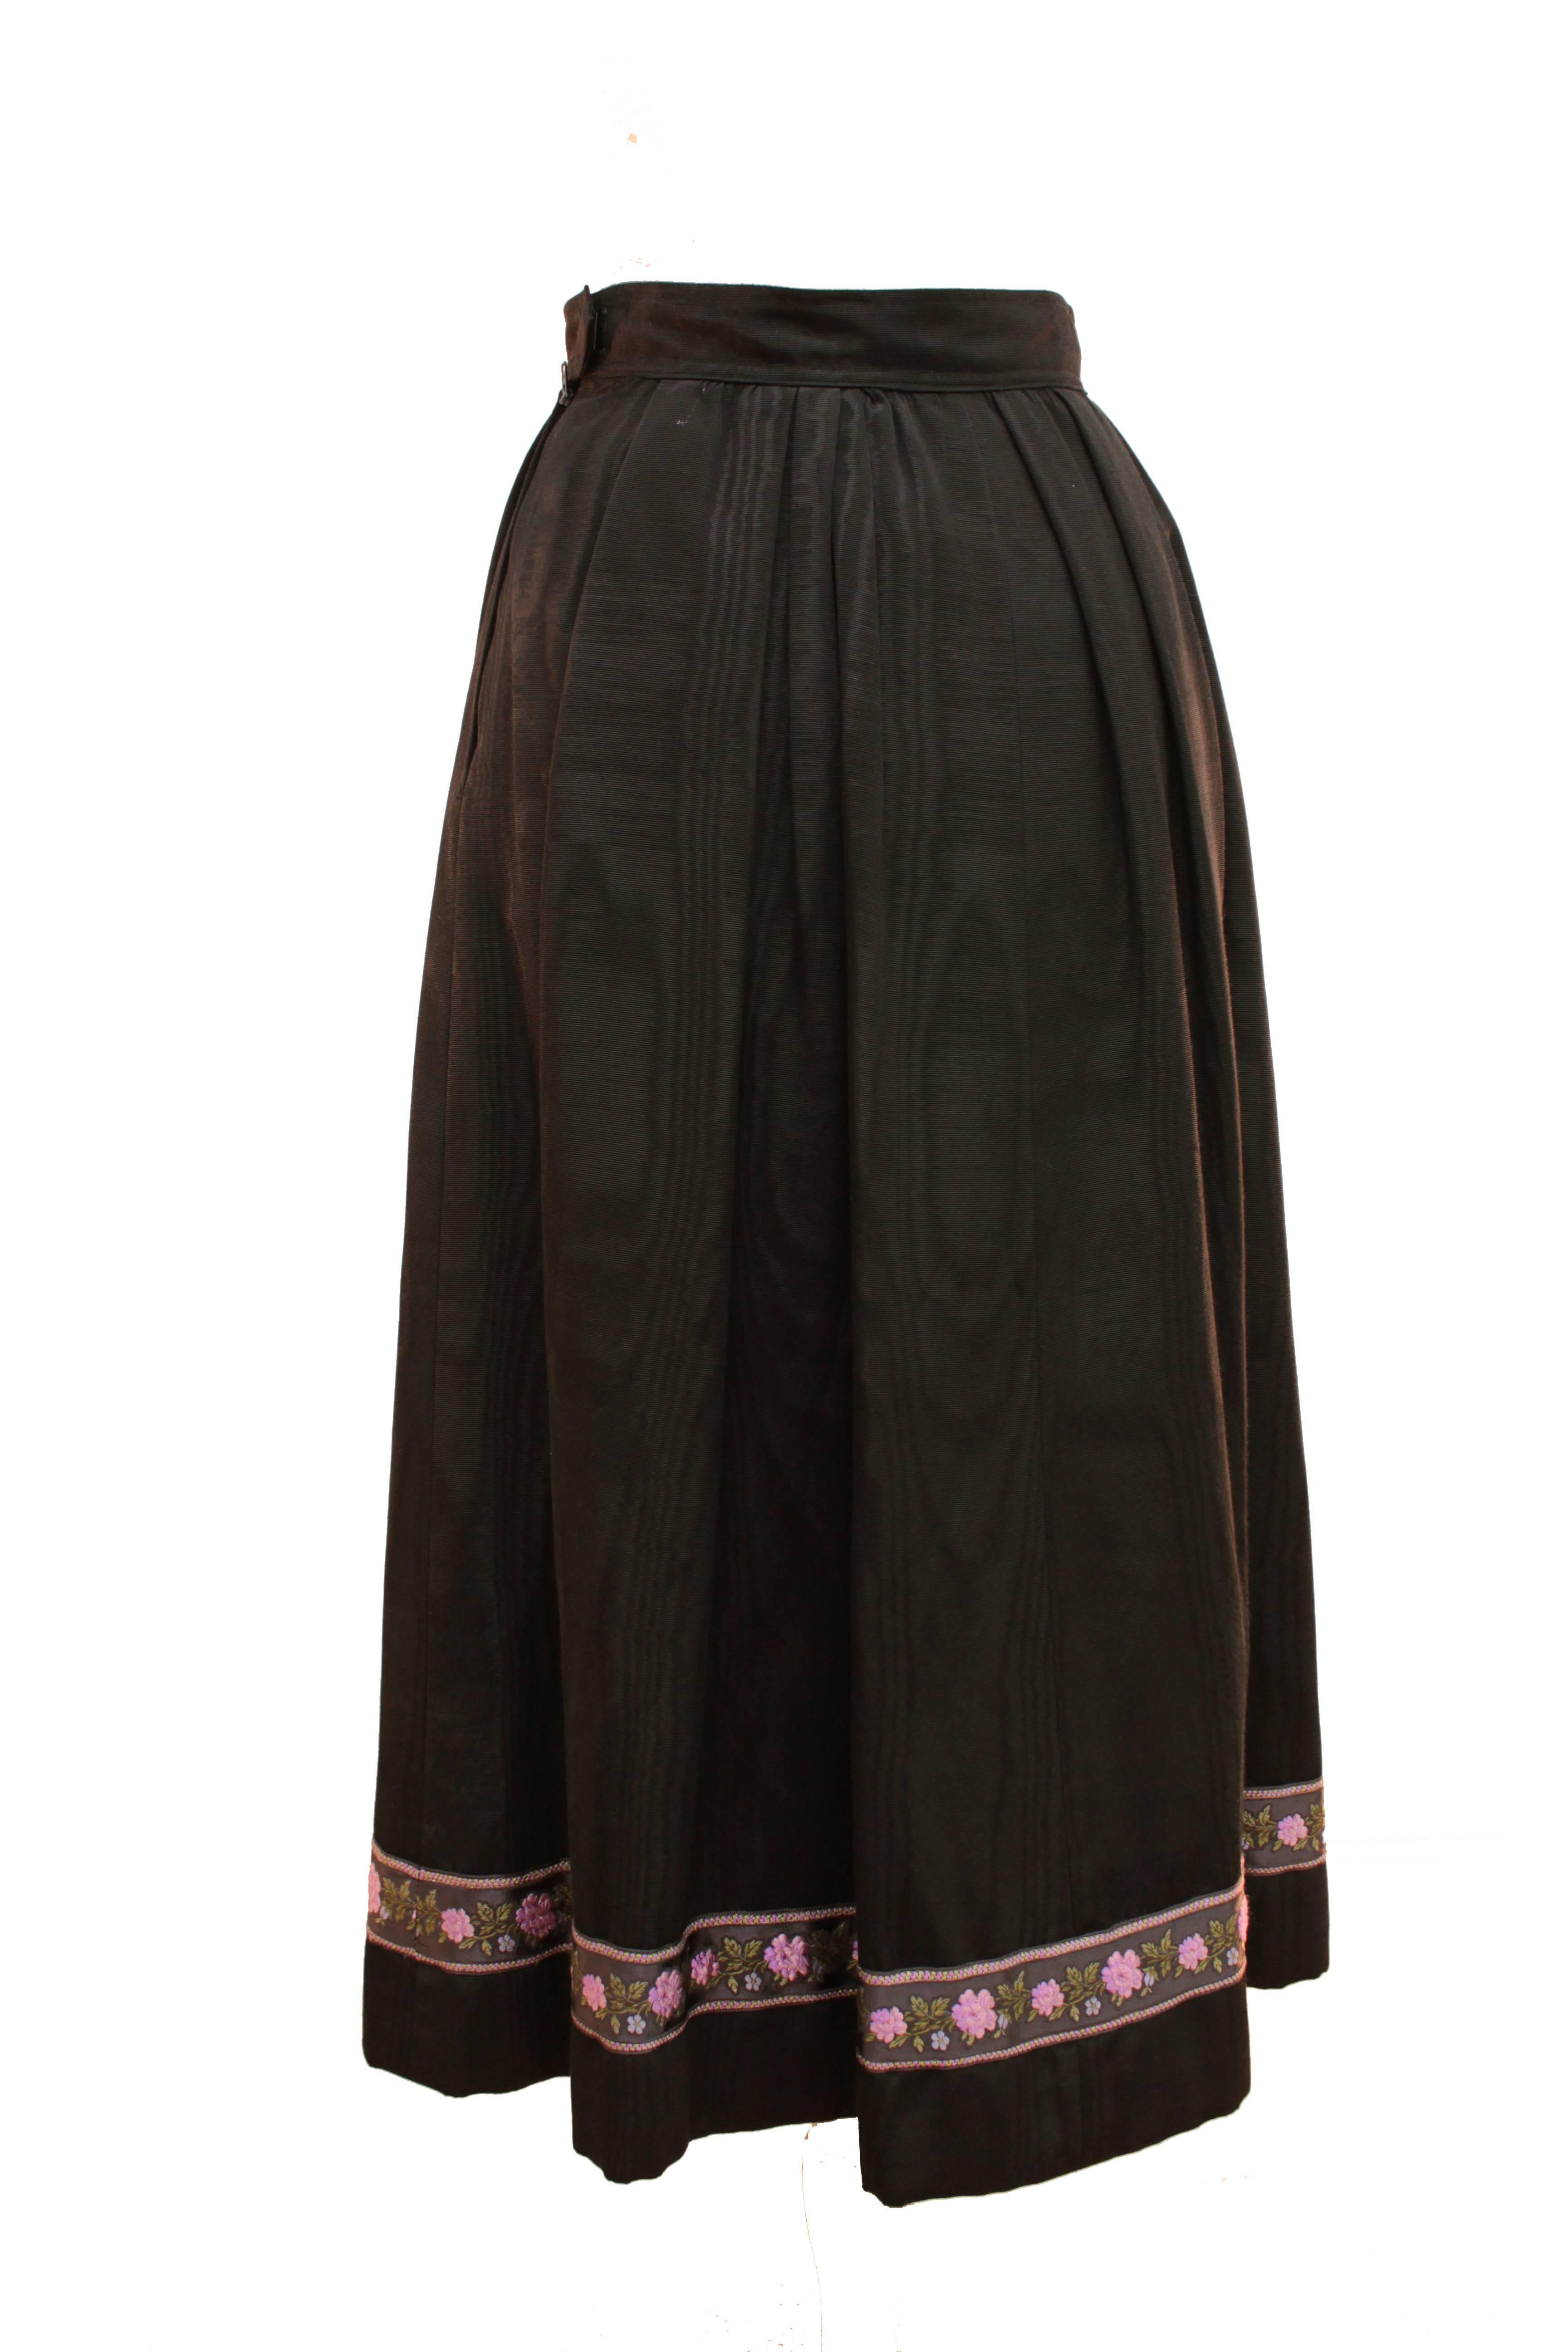 Yves Saint Laurent Silk Skirt Black Moire Embroidered Hem Russian Peasant 70s In Good Condition In Port Saint Lucie, FL